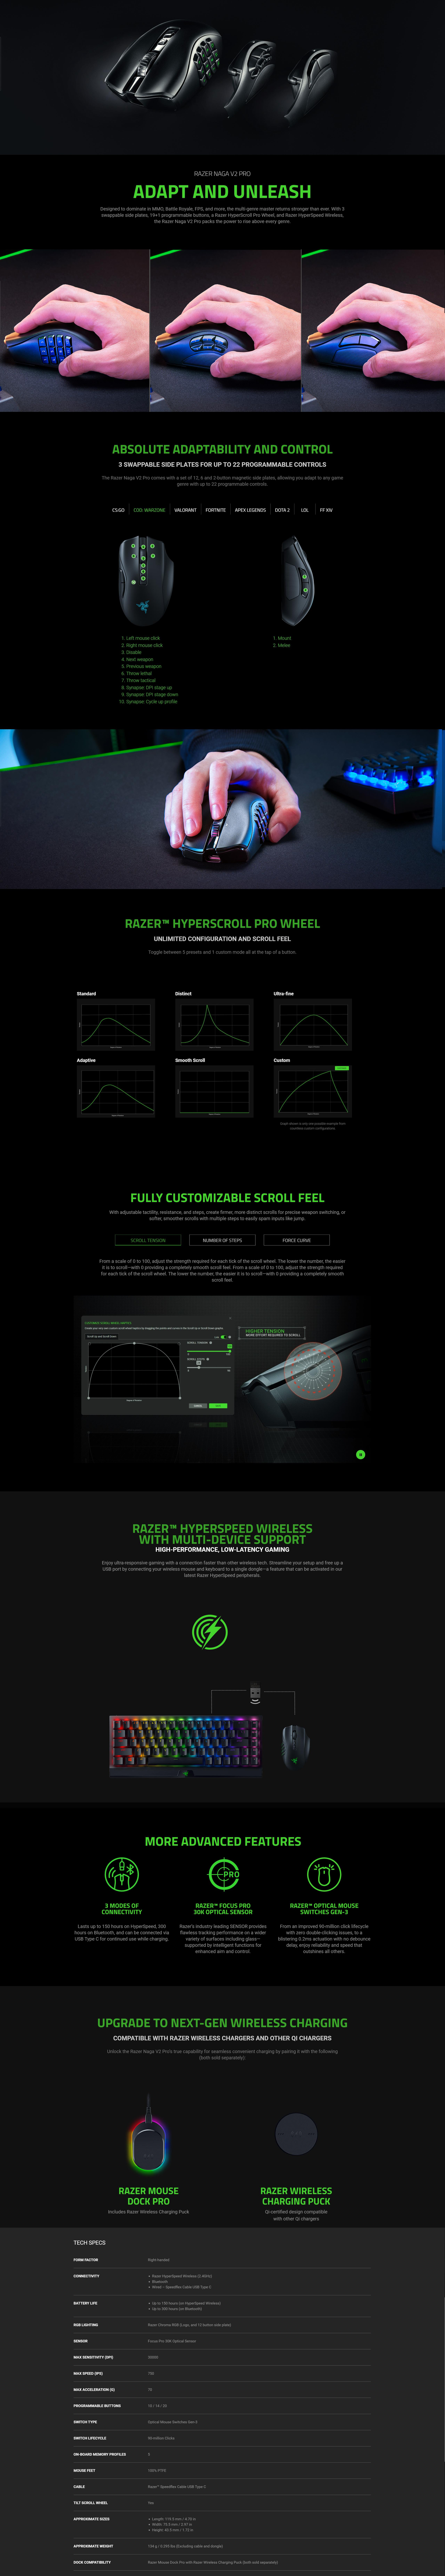 A large marketing image providing additional information about the product Razer Naga V2 Pro - Wireless Gaming Mouse - Additional alt info not provided